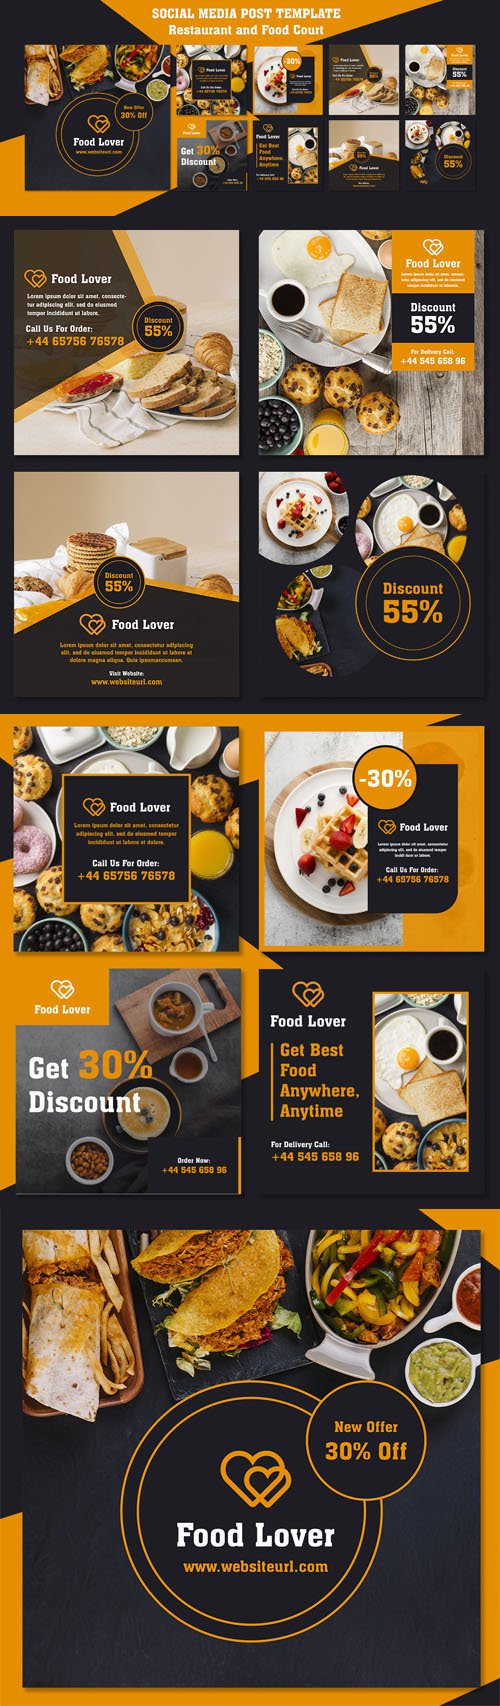 Restaurant and Food Court - Social Media Post PSD Template